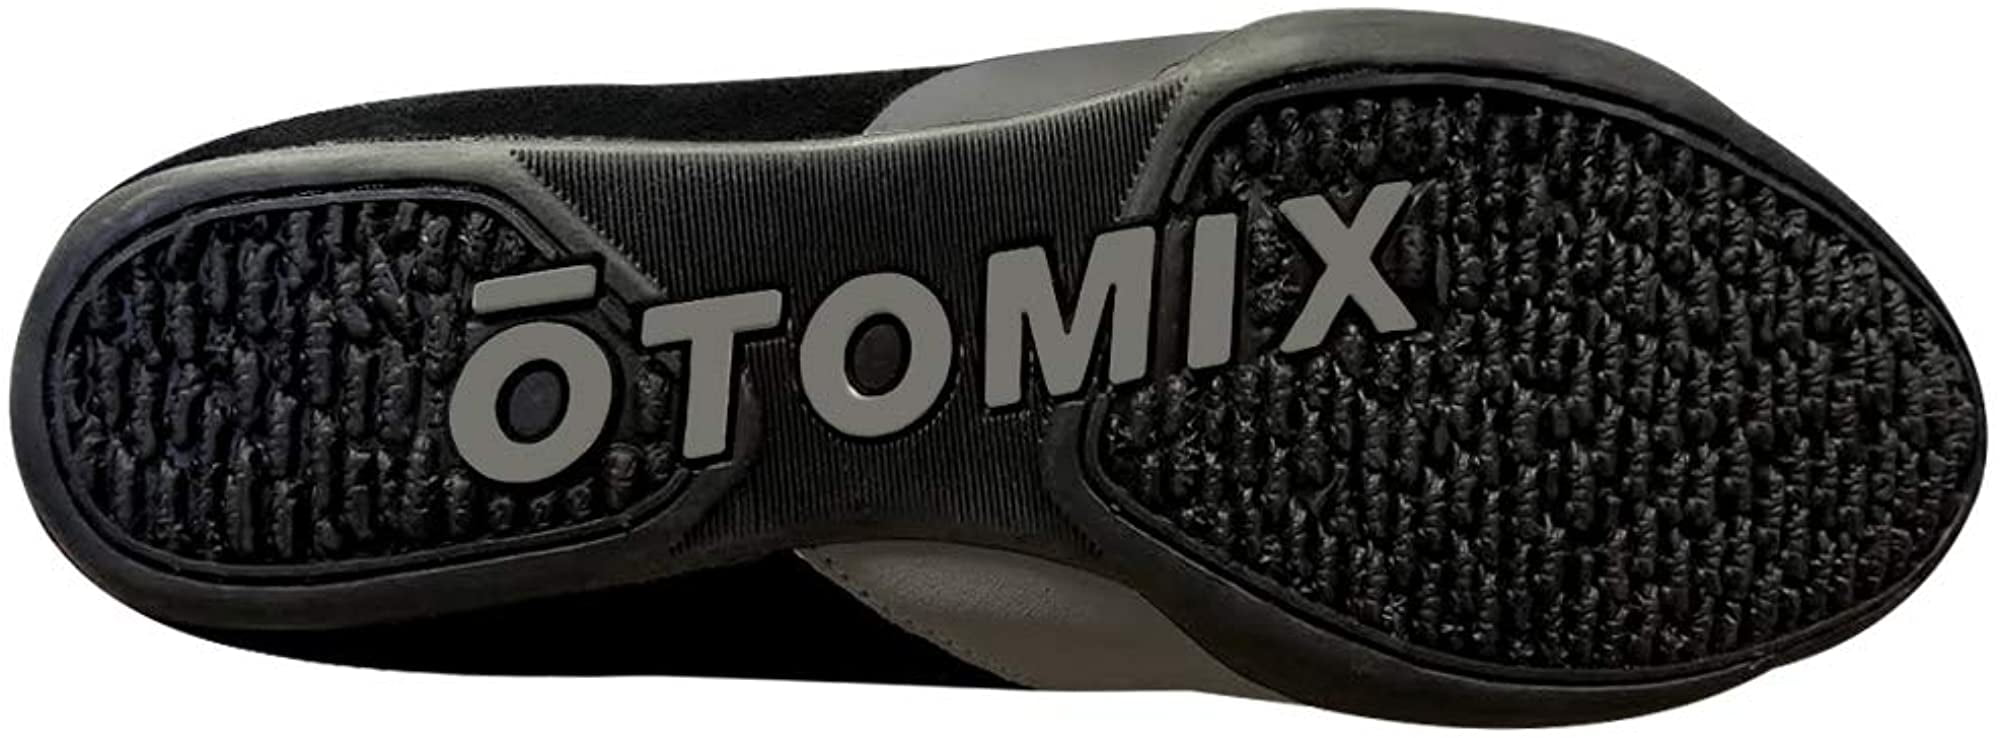 Otomix Mens Stingray Escape Bodybuilding Weightlifting MMA & Wrestling Shoes 